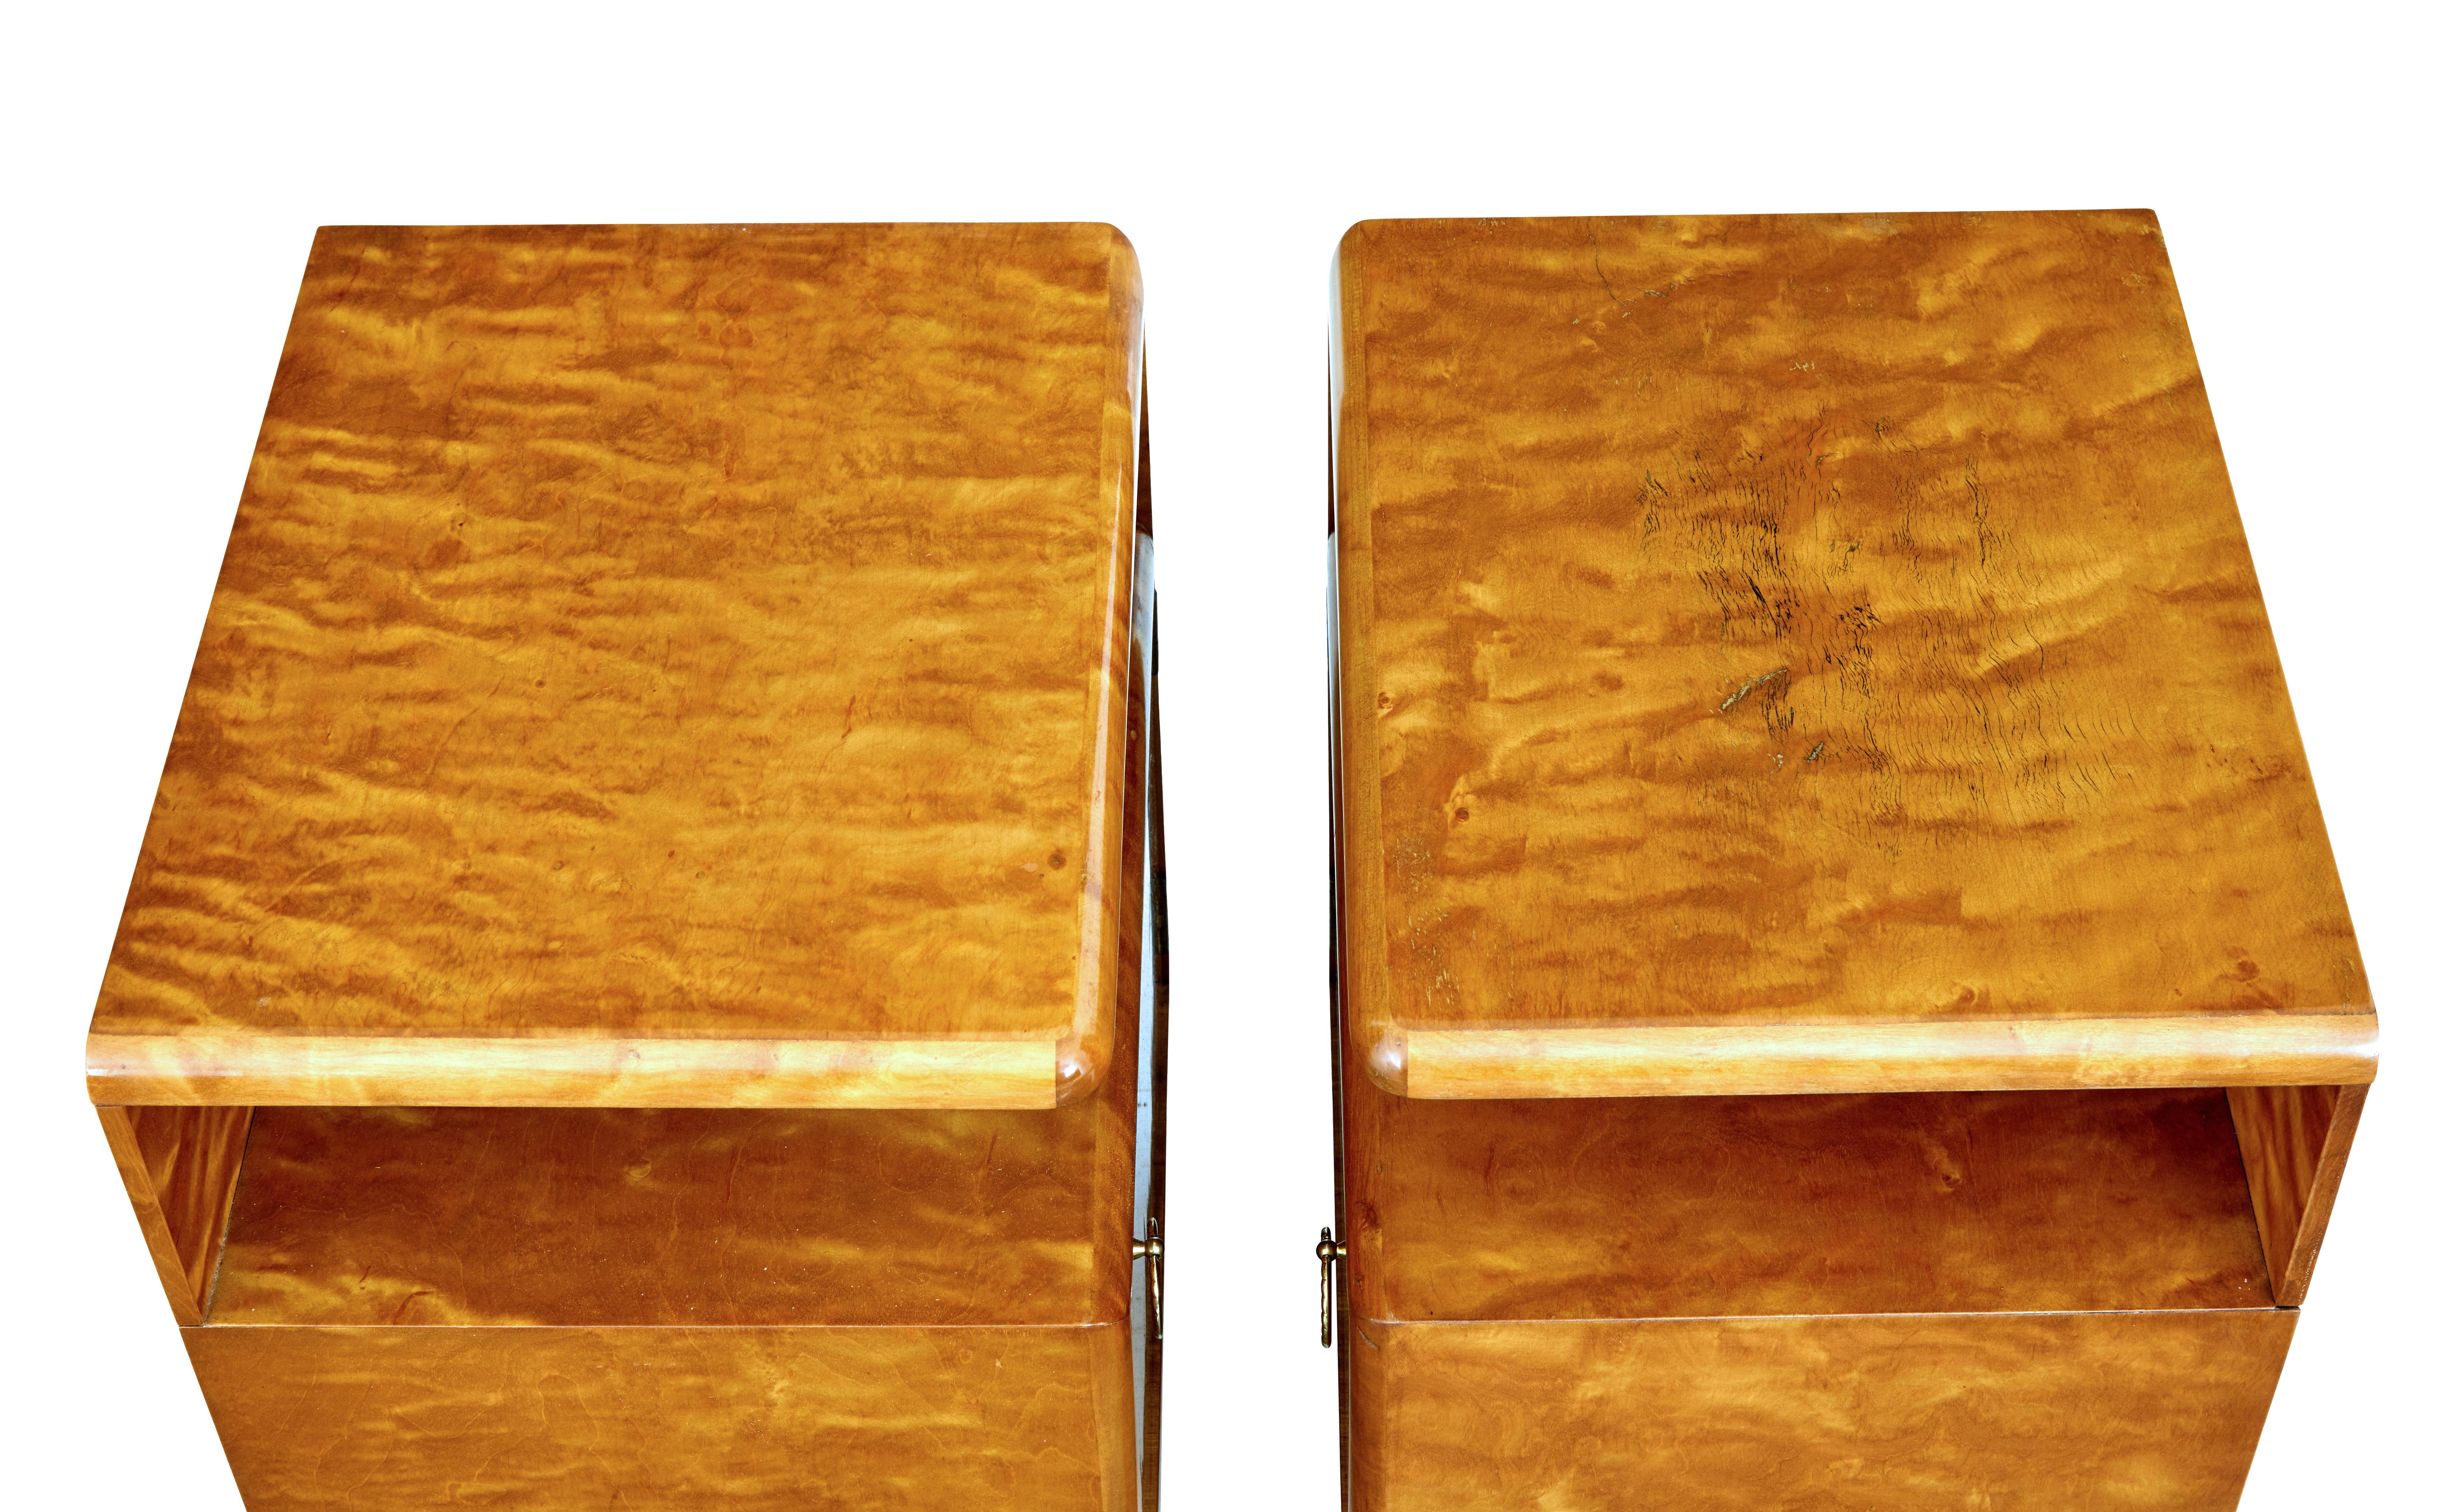 Pair of Mid-20th Century Swedish Birch Bedside Tables by Mobel AB Altorp 1